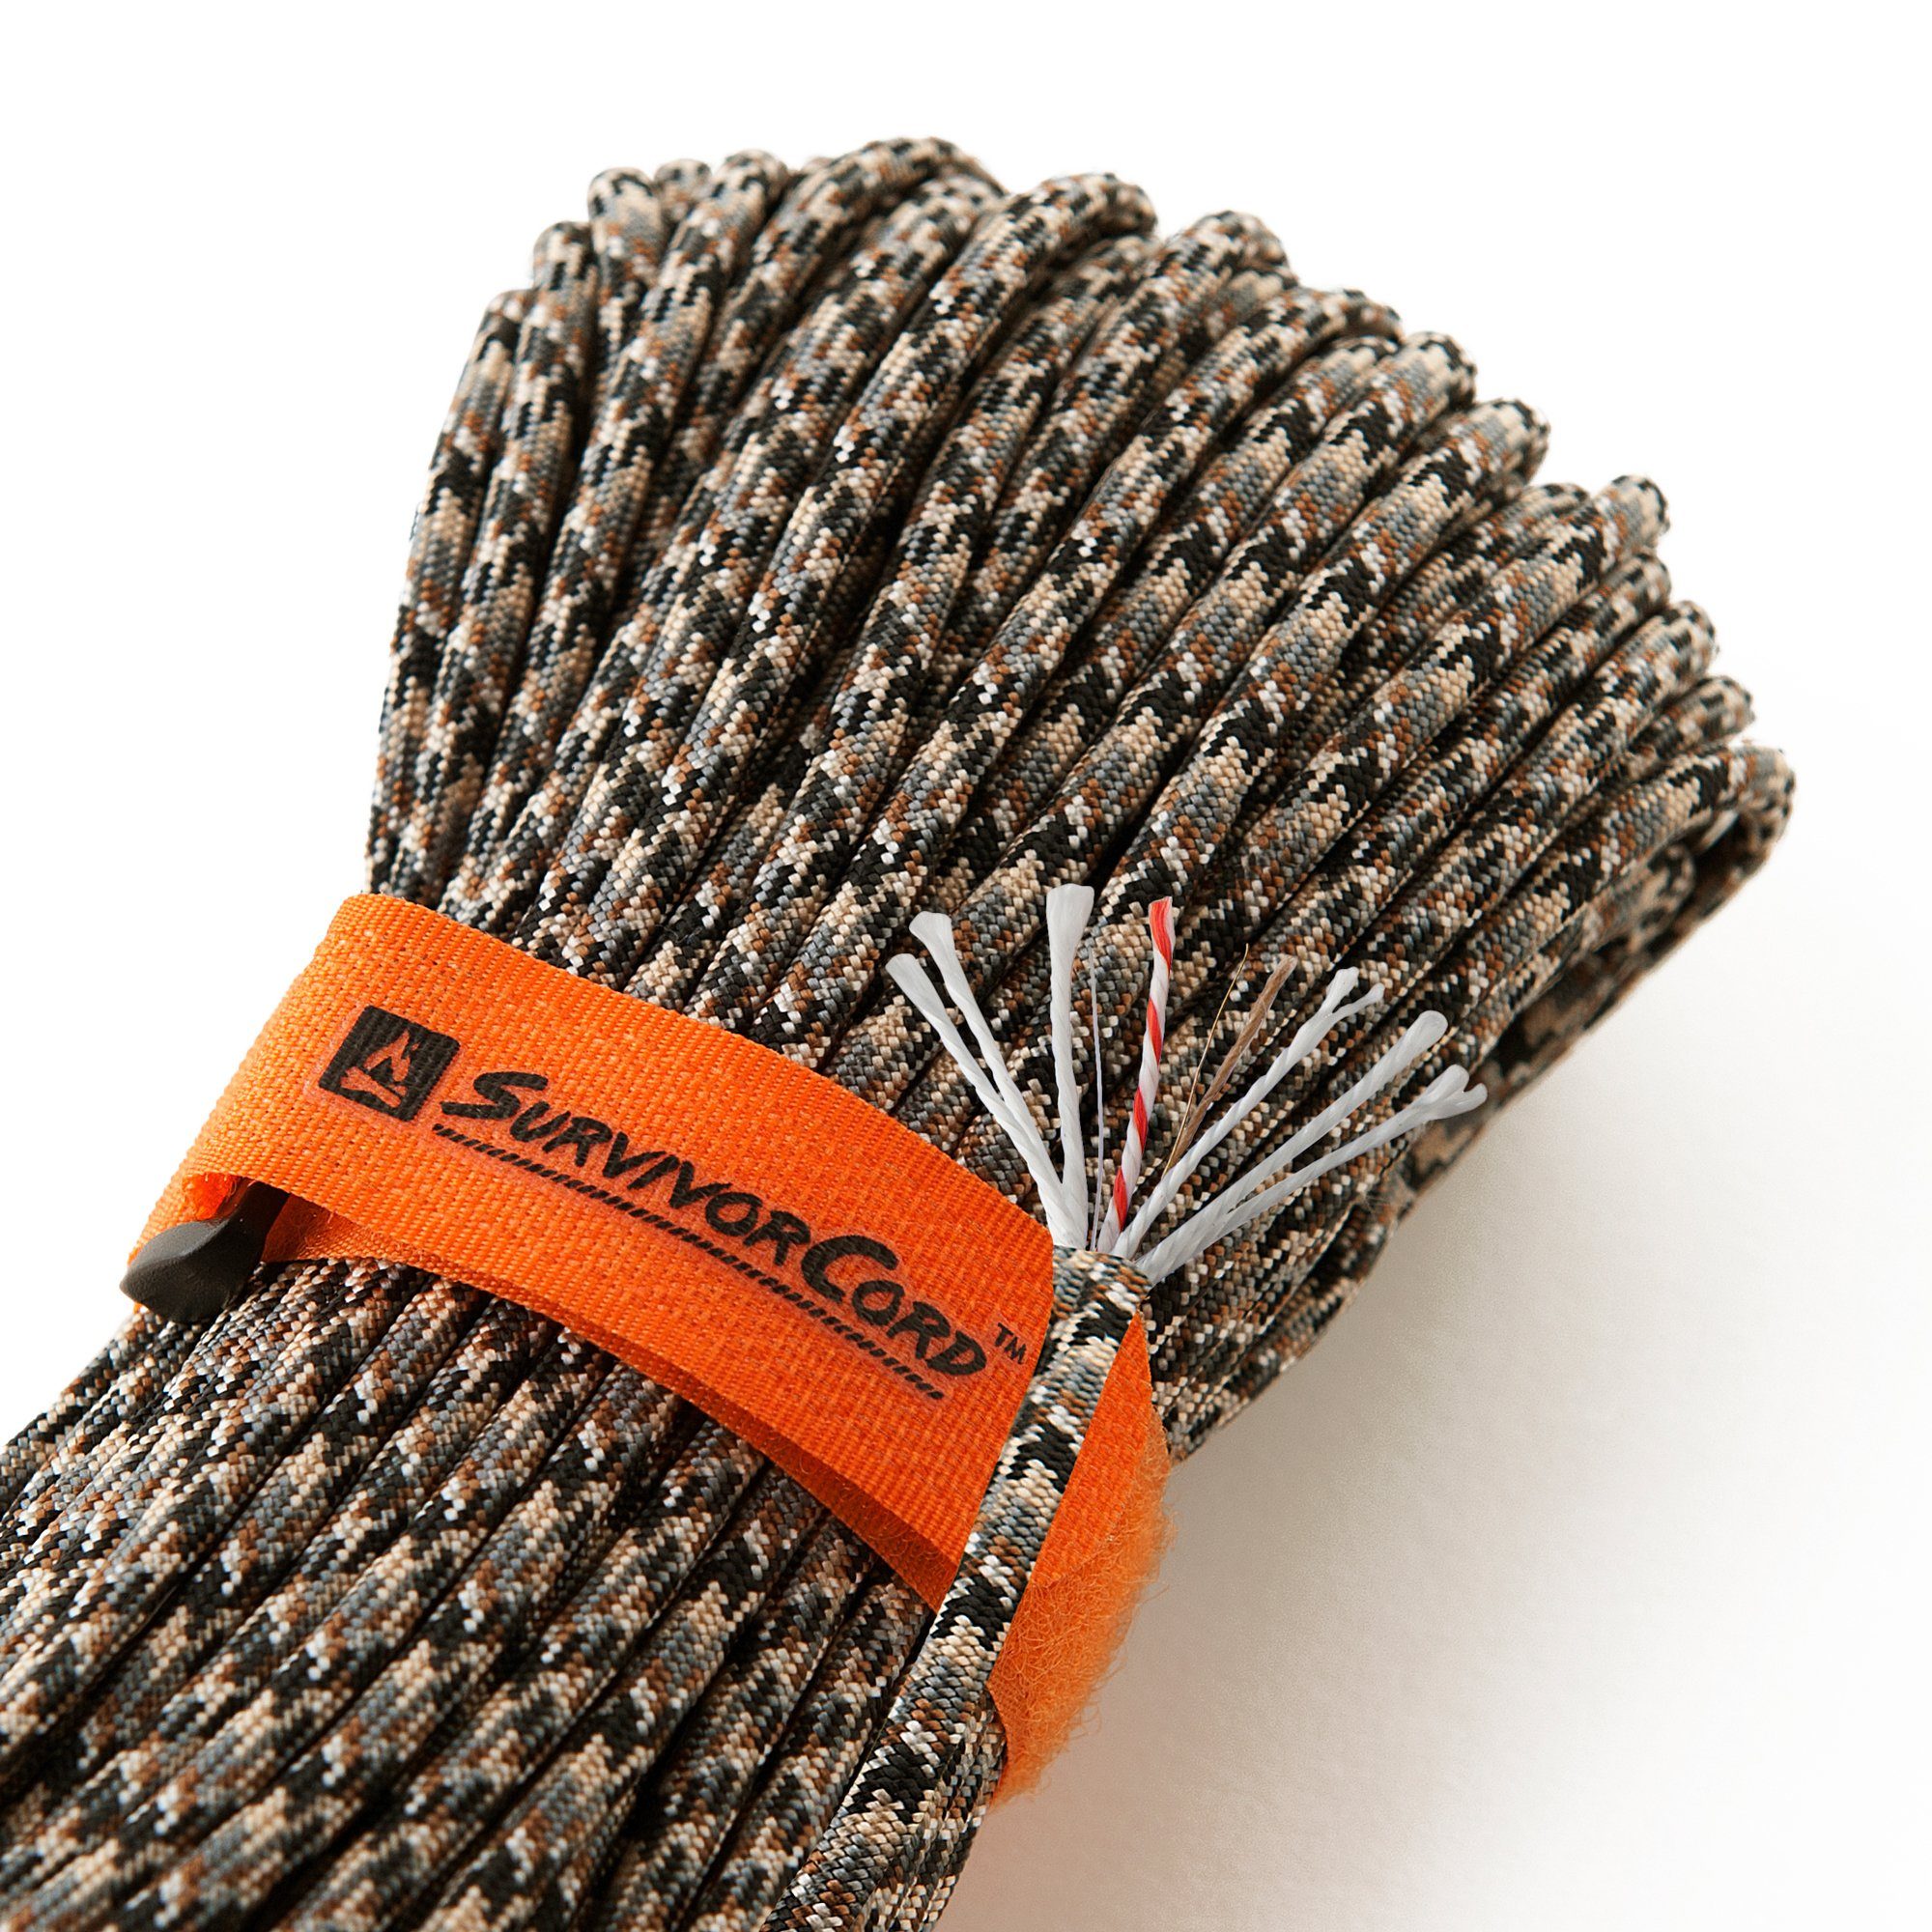 620 LB SurvivorCord - The Original Patented Type III Military 550 Parachute  Cord with Integrated Fishing Line, Multi-Purpose Wire, and Waterproof Fire  Starter. 100 FEET, DRAGONSCALE Paracord, Ropes -  Canada